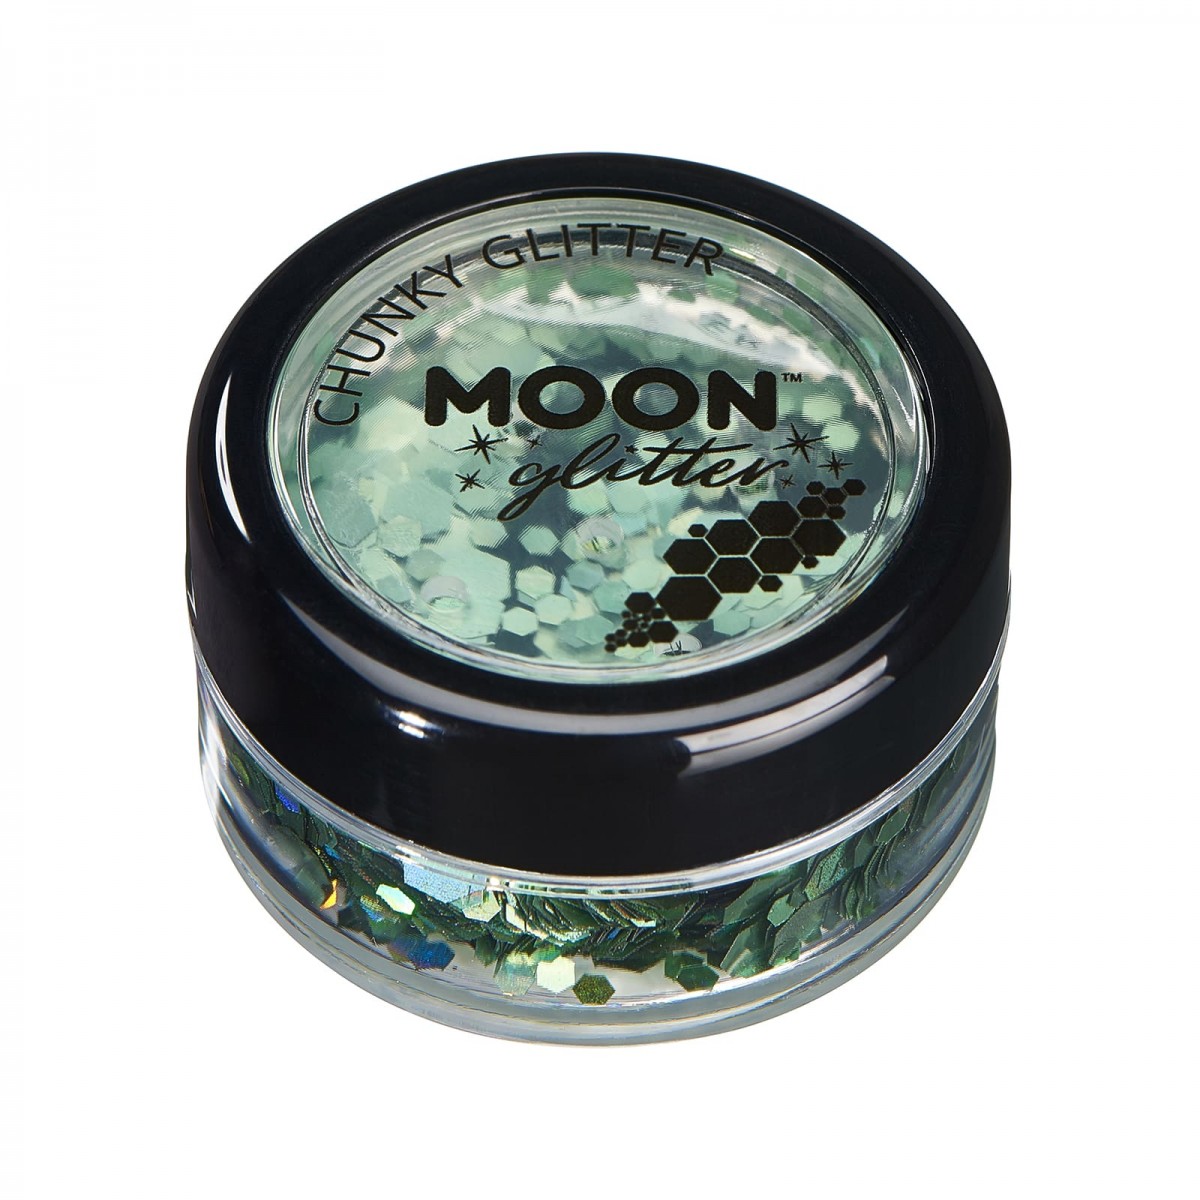 MOON CREATIONS G4 HOLOGRAPHIC CHUNKY GLITTER GREEN 3g